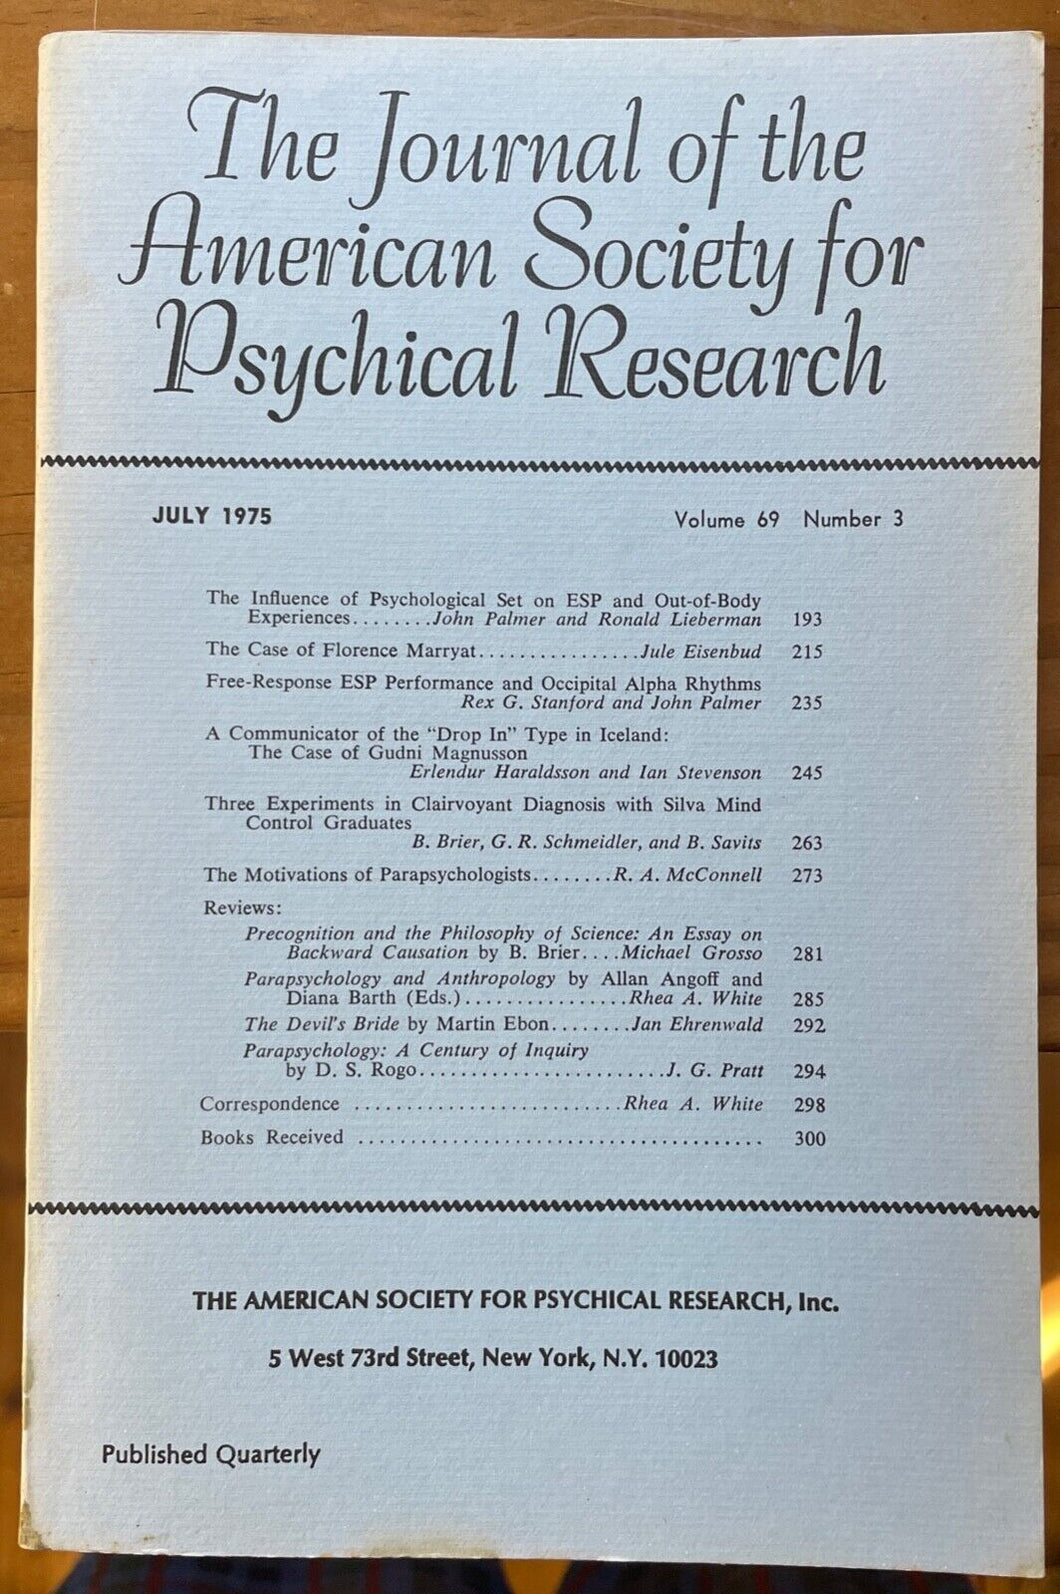 1975 JOURNAL OF AMERICAN SOCIETY FOR PSYCHICAL RESEARCH ASPR - OUT OF BODY, OBE